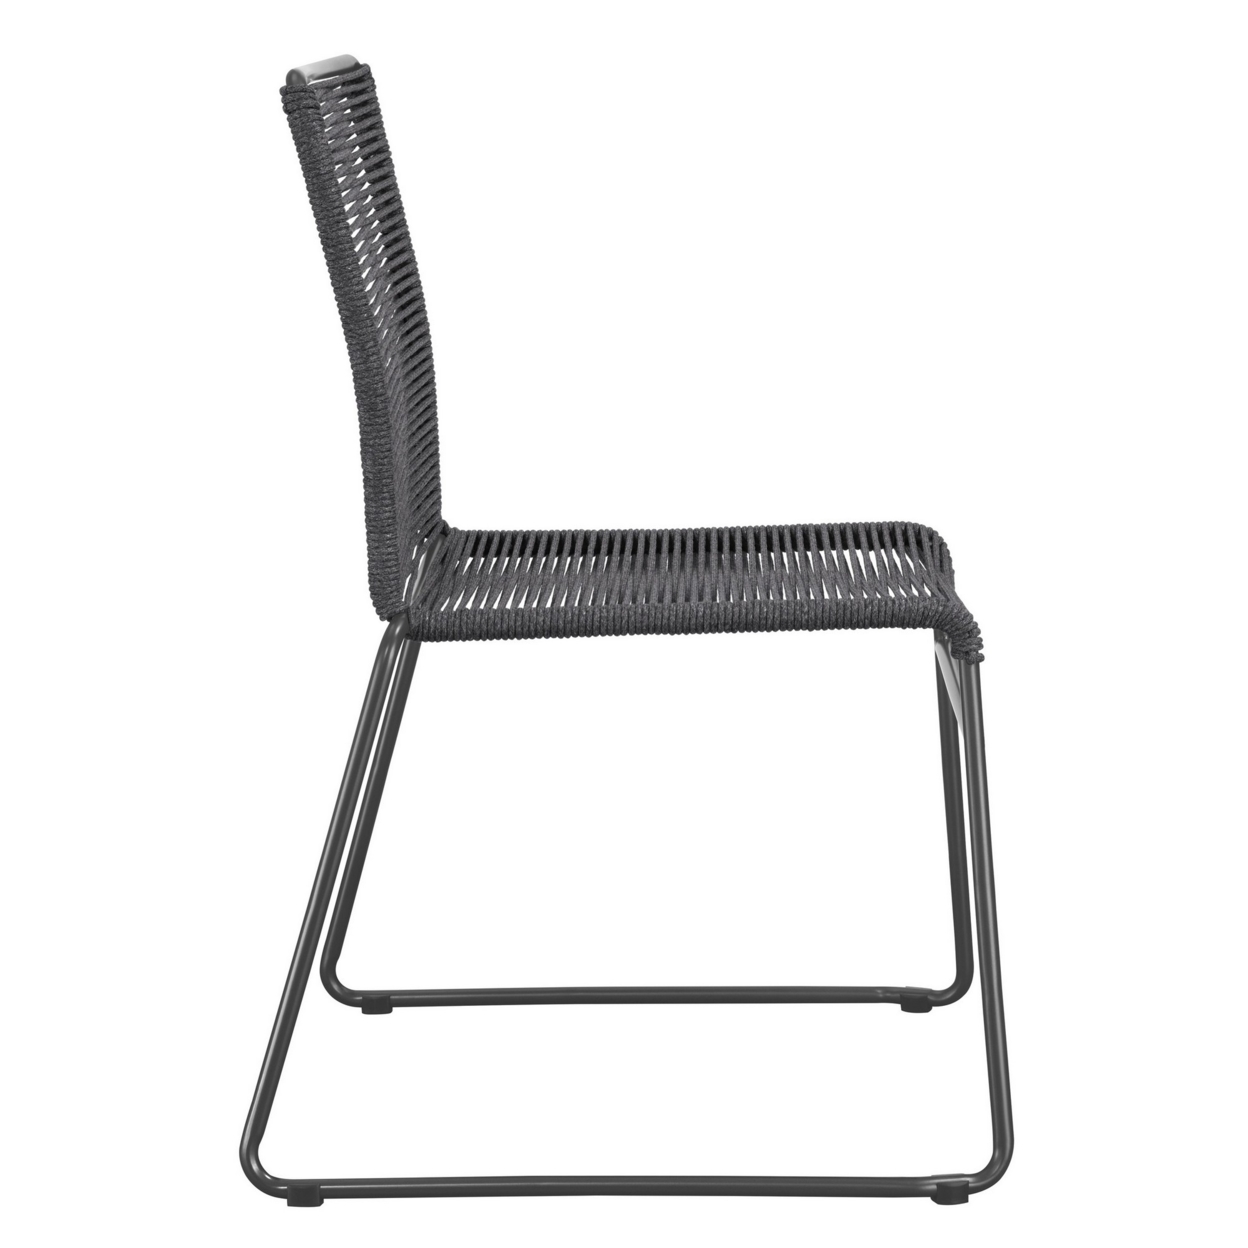 Fyth 23 Inch Side Dining Chair, Set Of 2, Charcoal Rope Woven Seat, Metal- Saltoro Sherpi